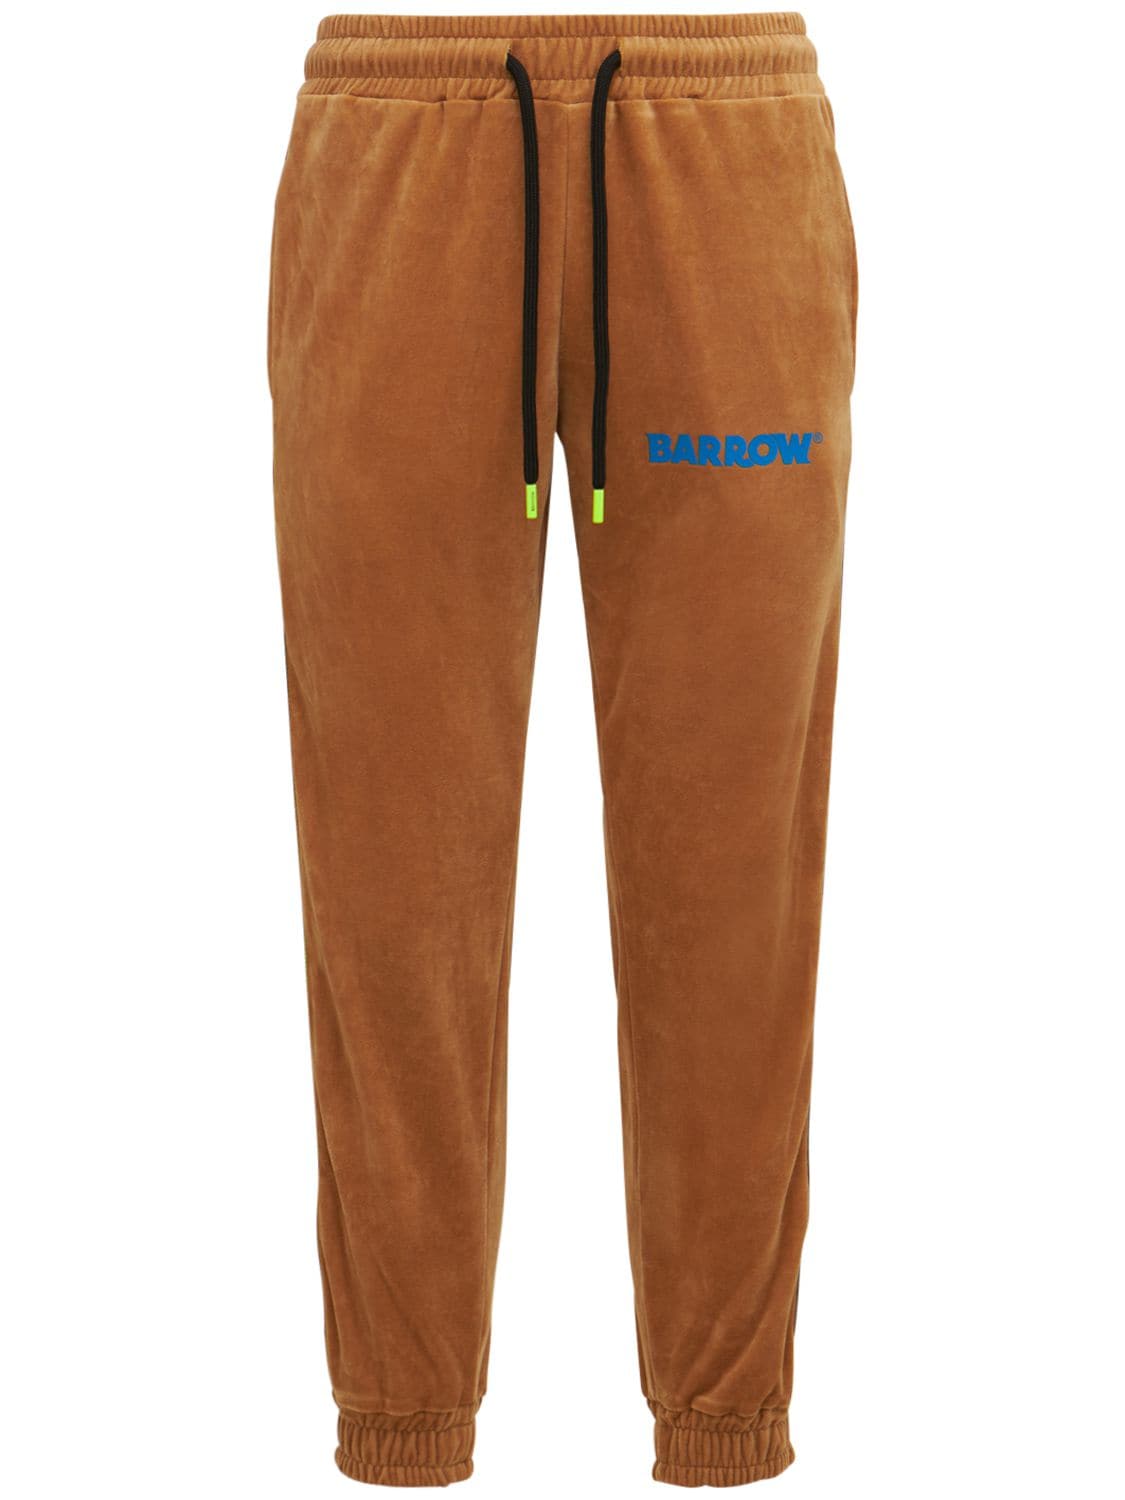 Barrow Logo Cotton Terry Cloth Pants In Beige